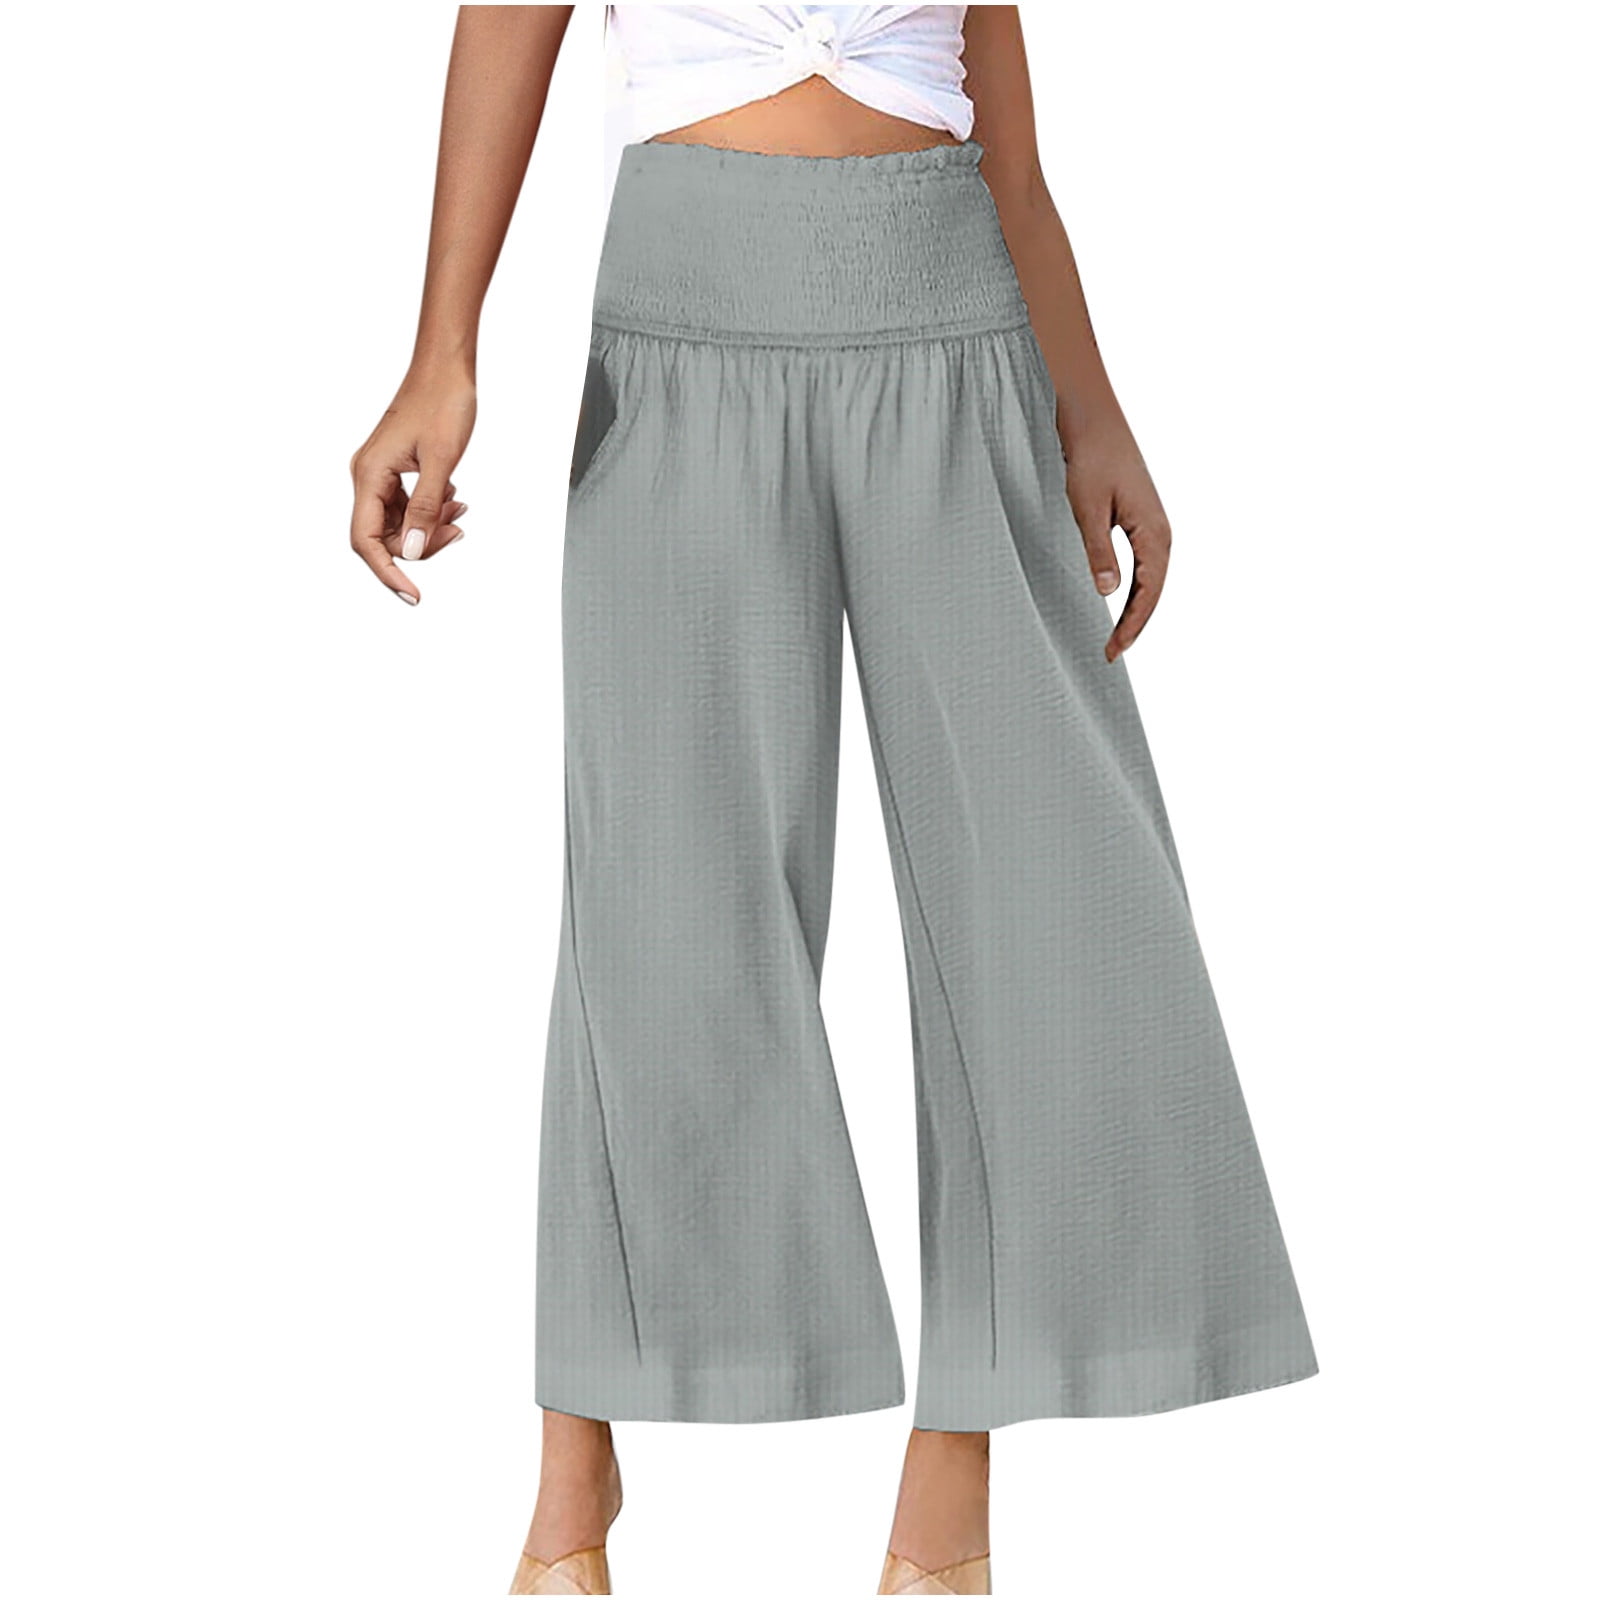 Elegant Linen High Waist Pants (choose from 7 colors) Made-to